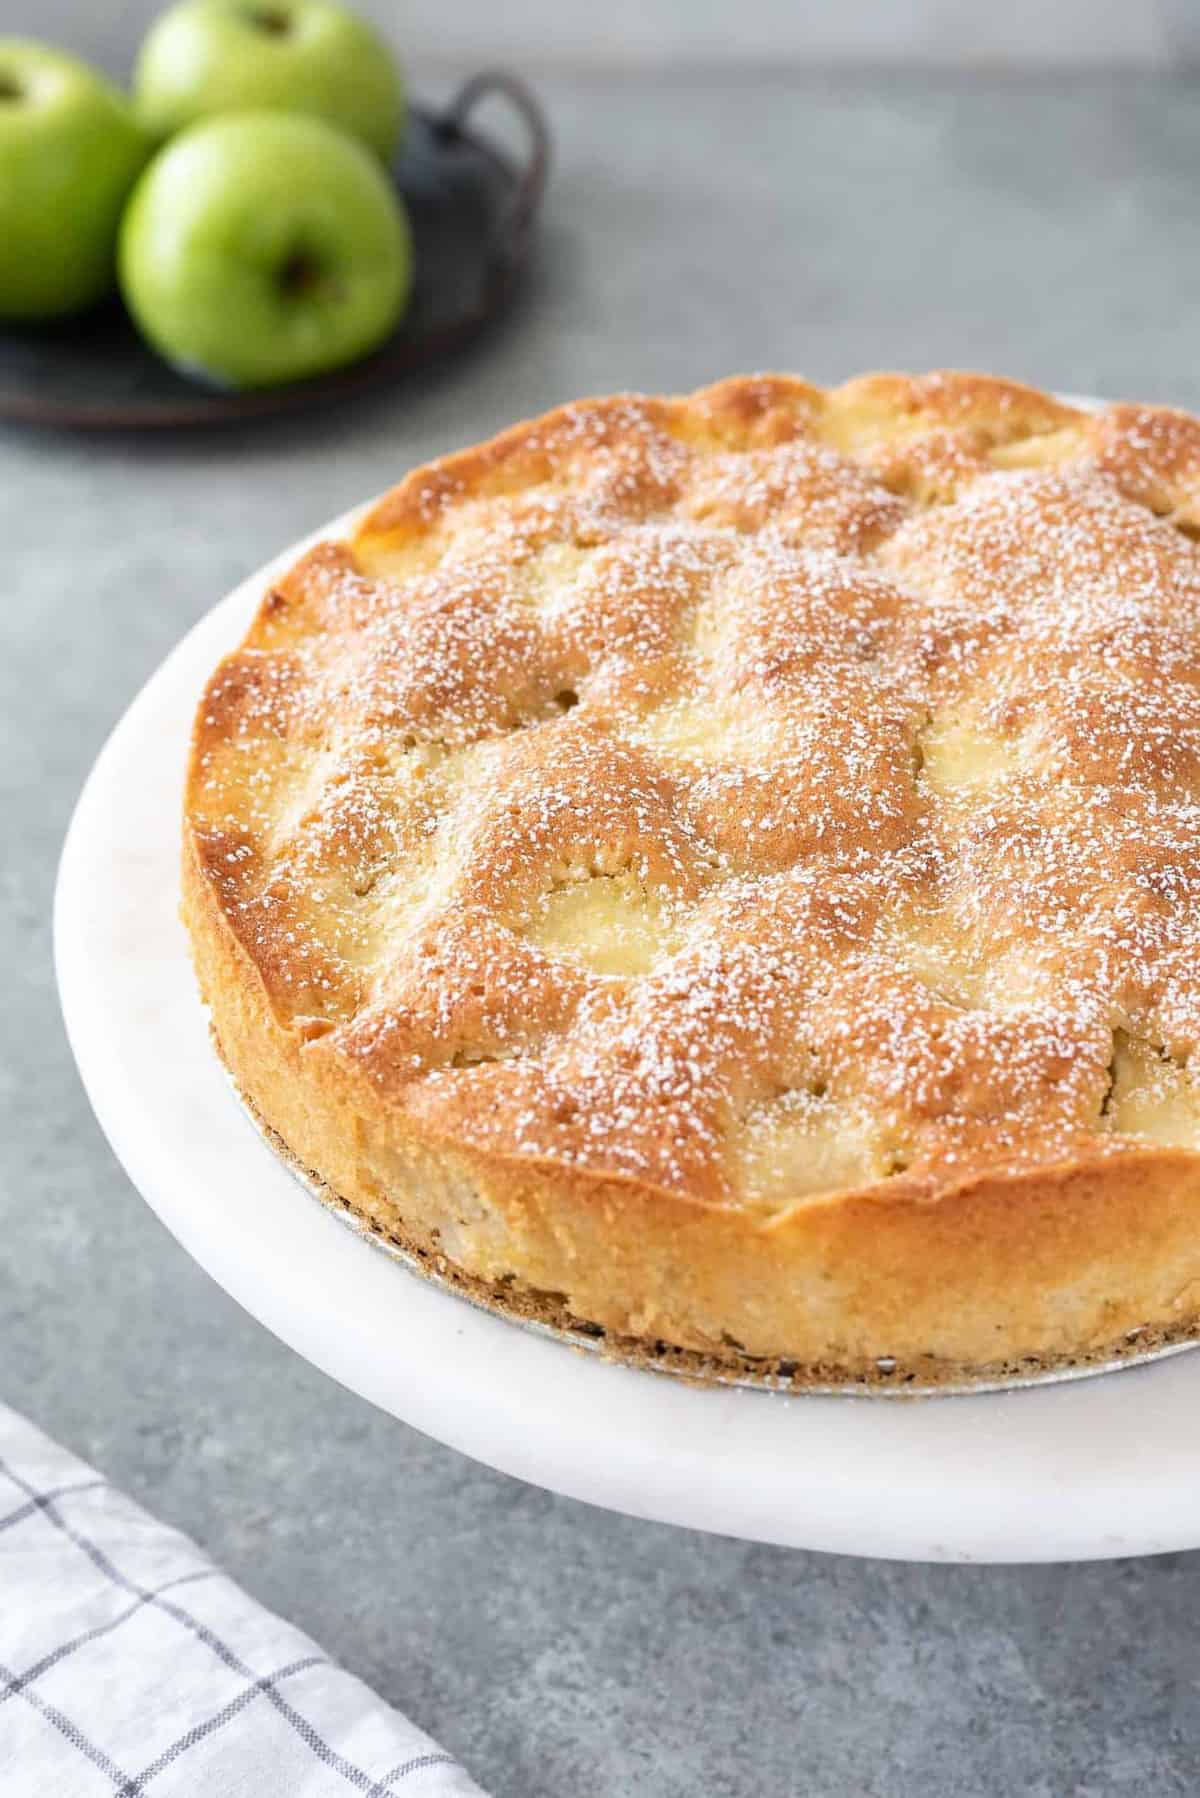 A close up view of French apple cake on a white plate with green apples in the background.